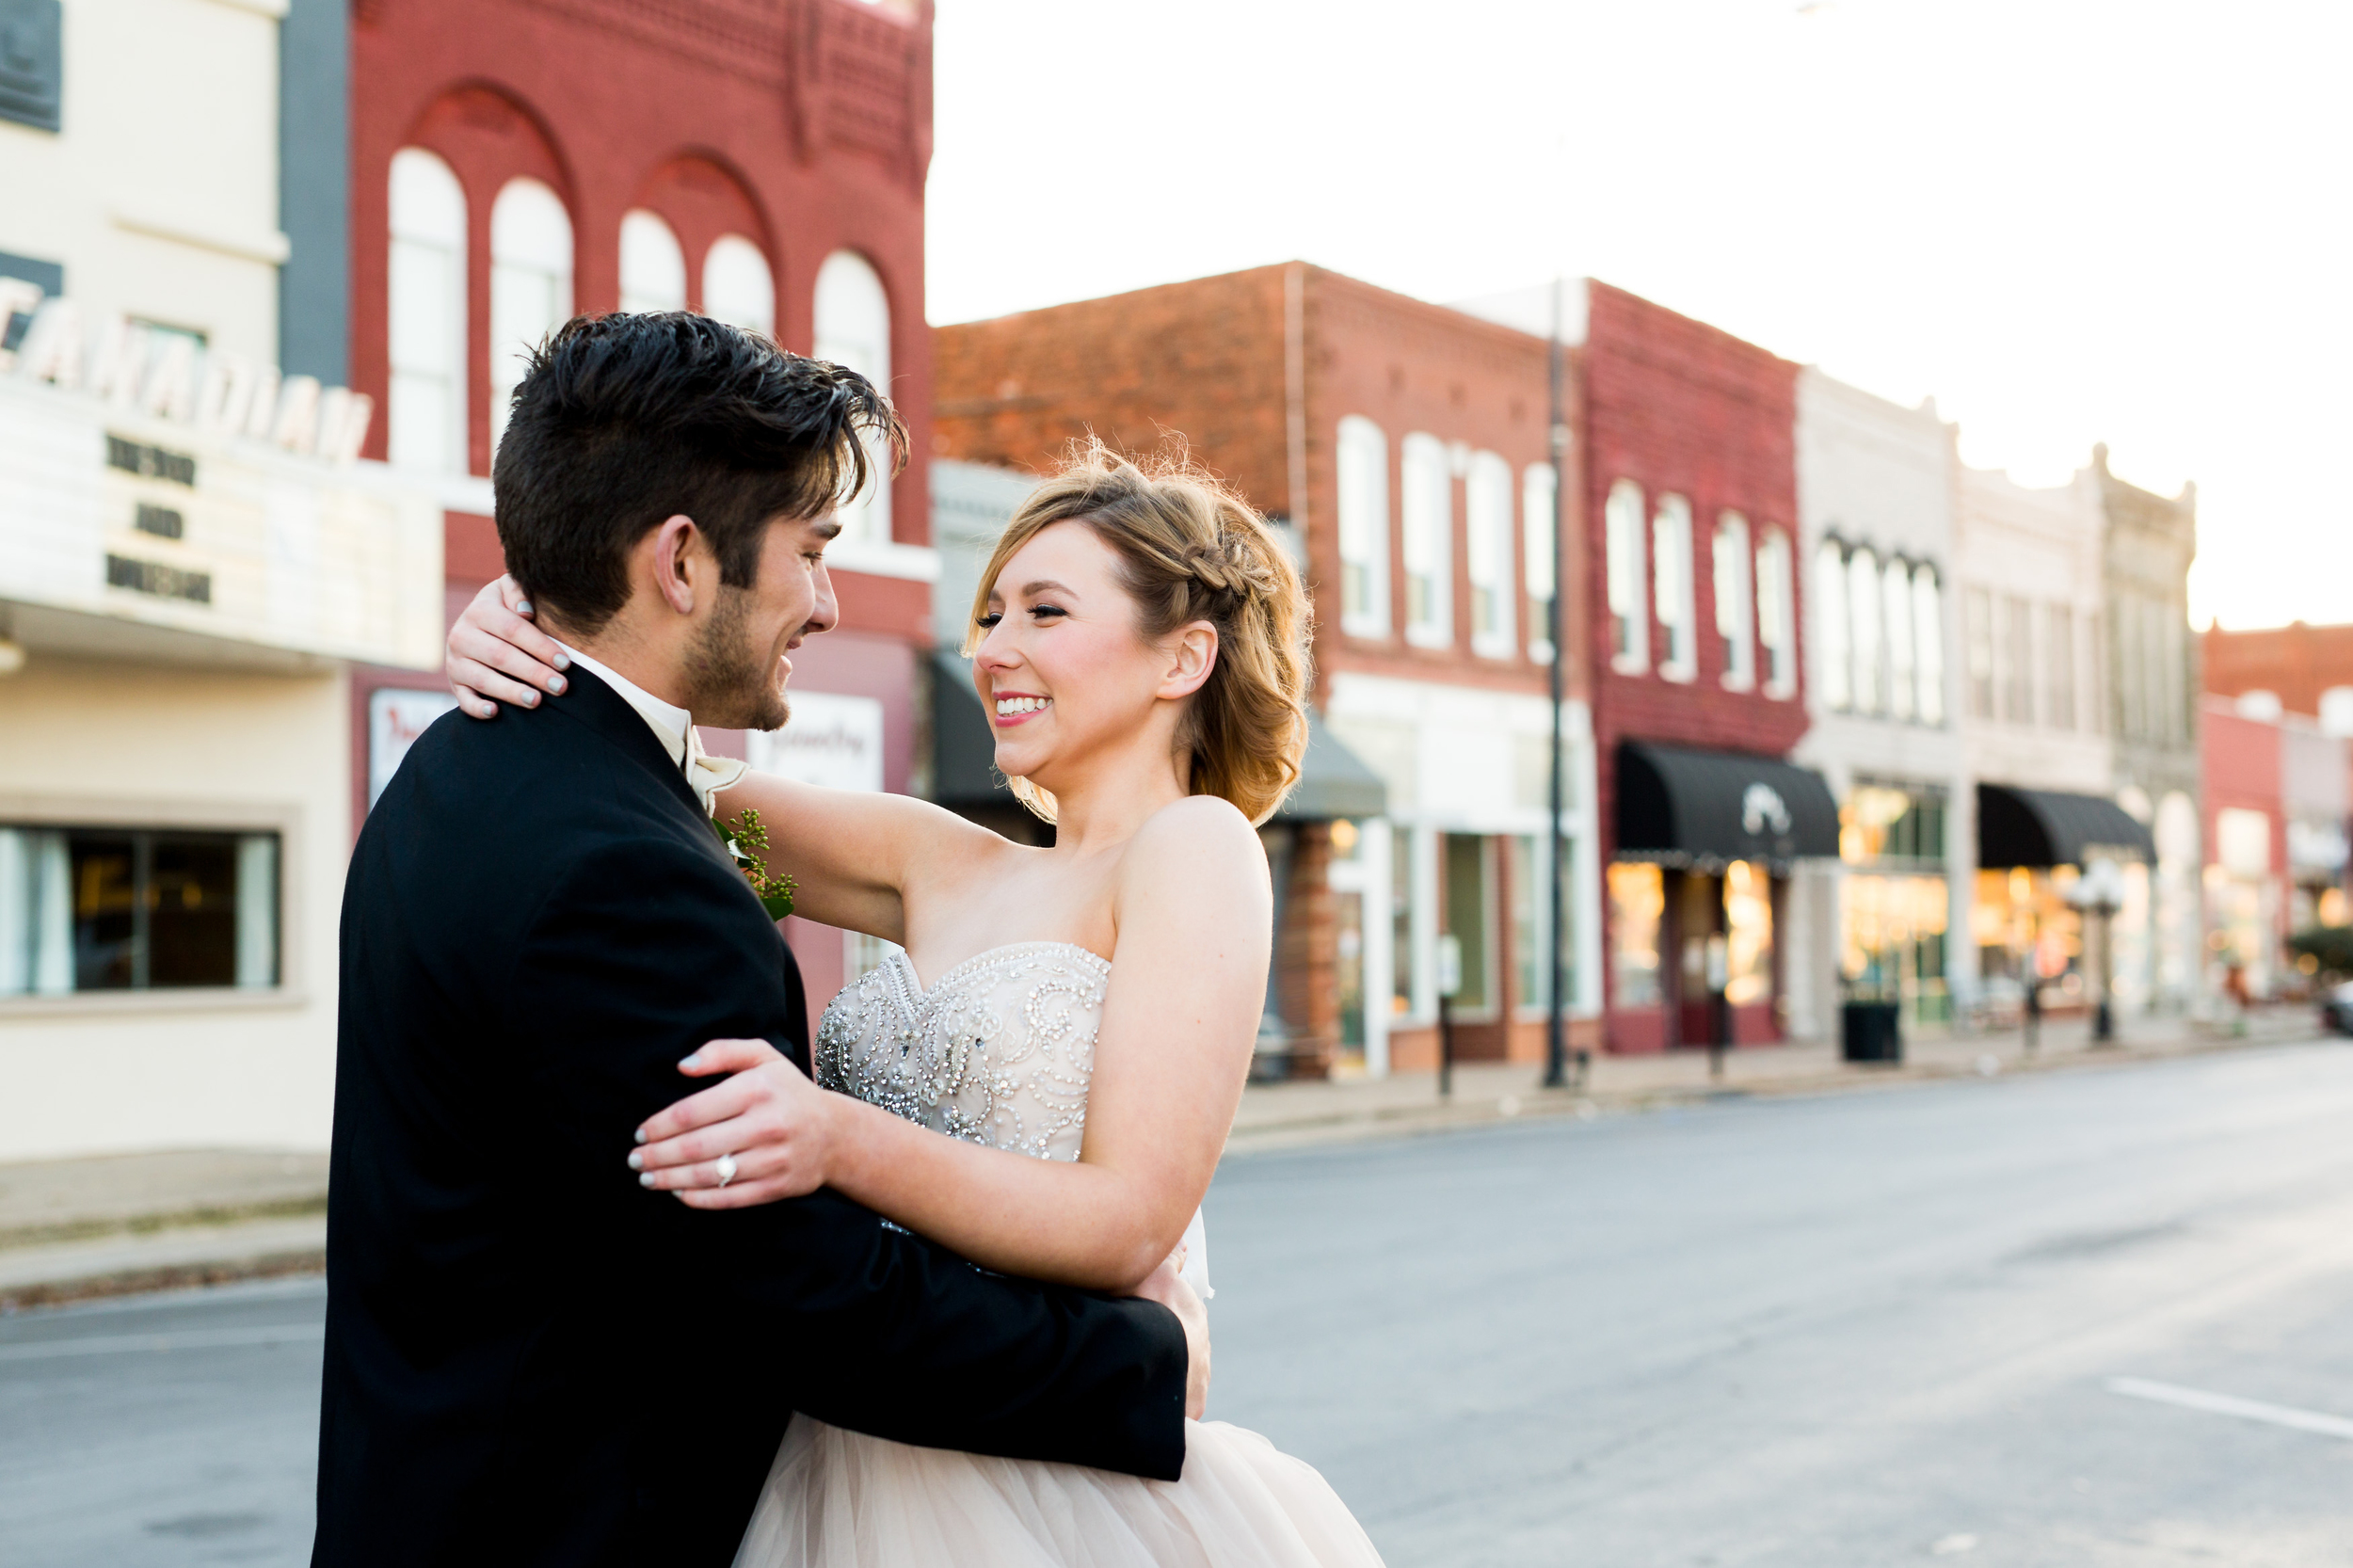 The Grand Canadian Theater OKC Purcell Wedding Venue Ashley Porton Photography Downtown Purcell